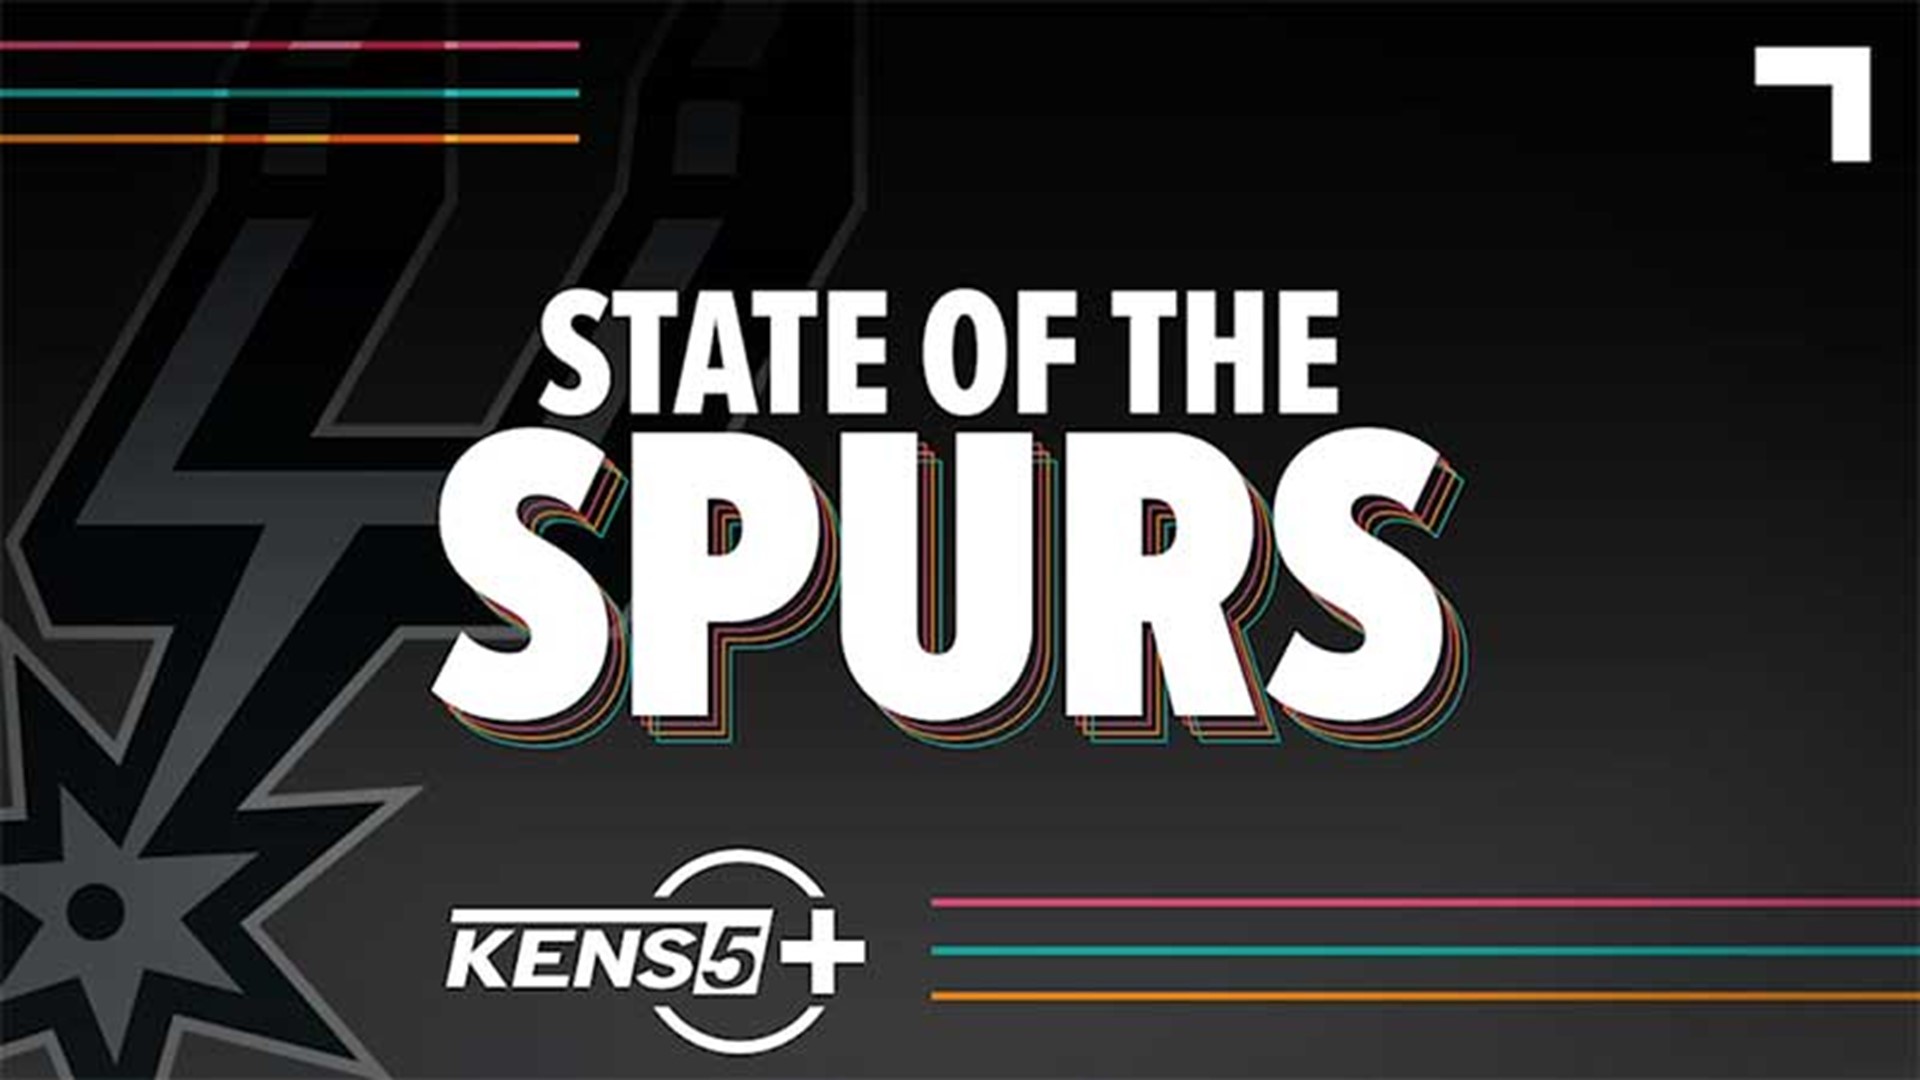 The Spurs find themselves at a crossroads as the NBA Draft and free agency offer opportunities to rebuild and climb back to the top.